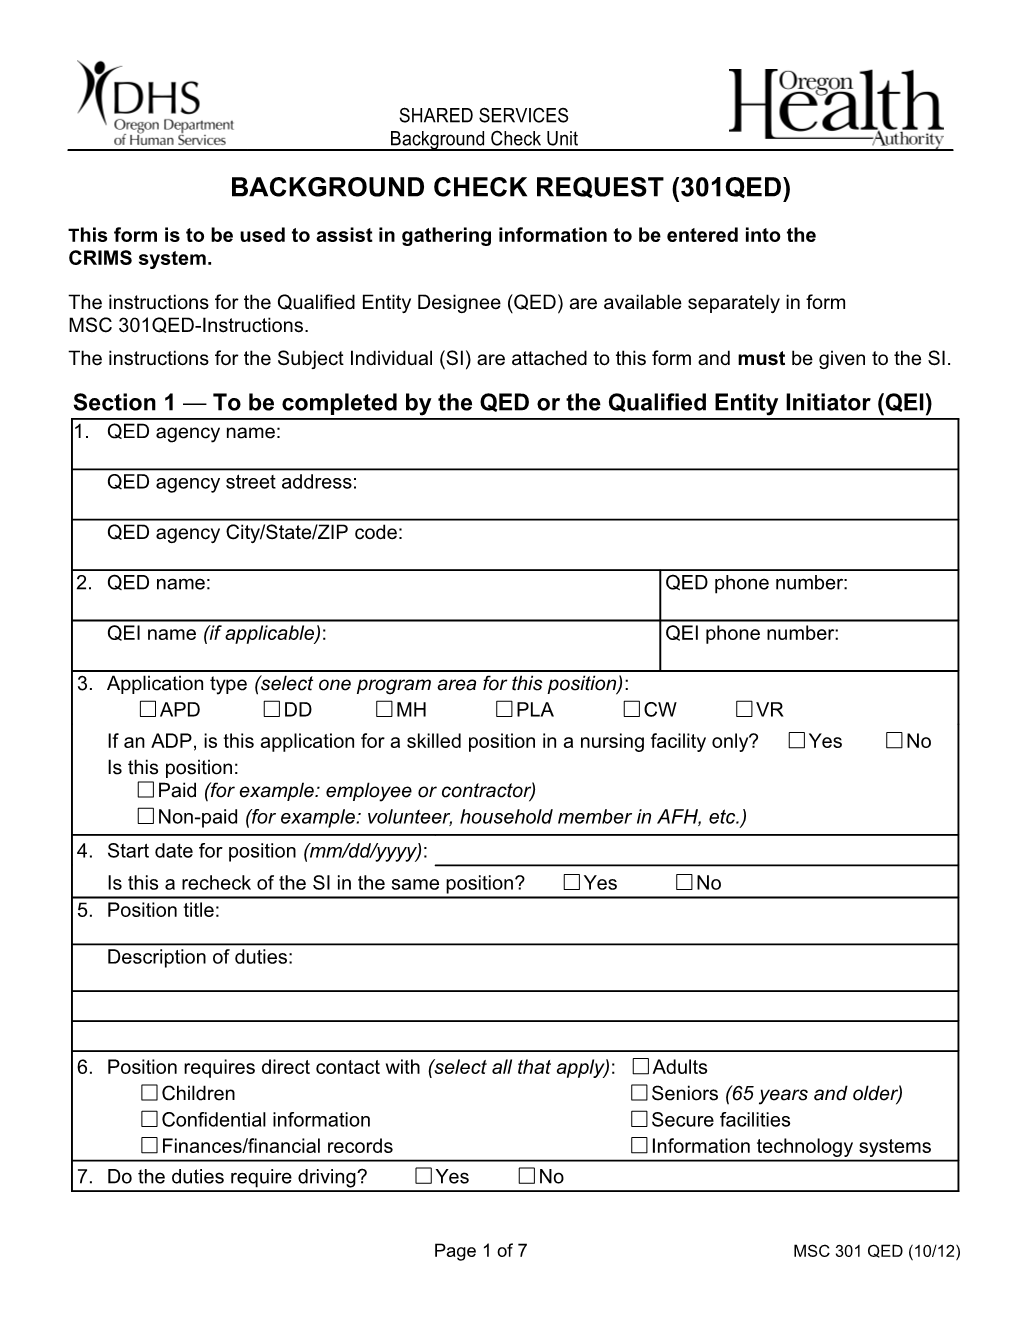 Background Check Request - Form 301QED